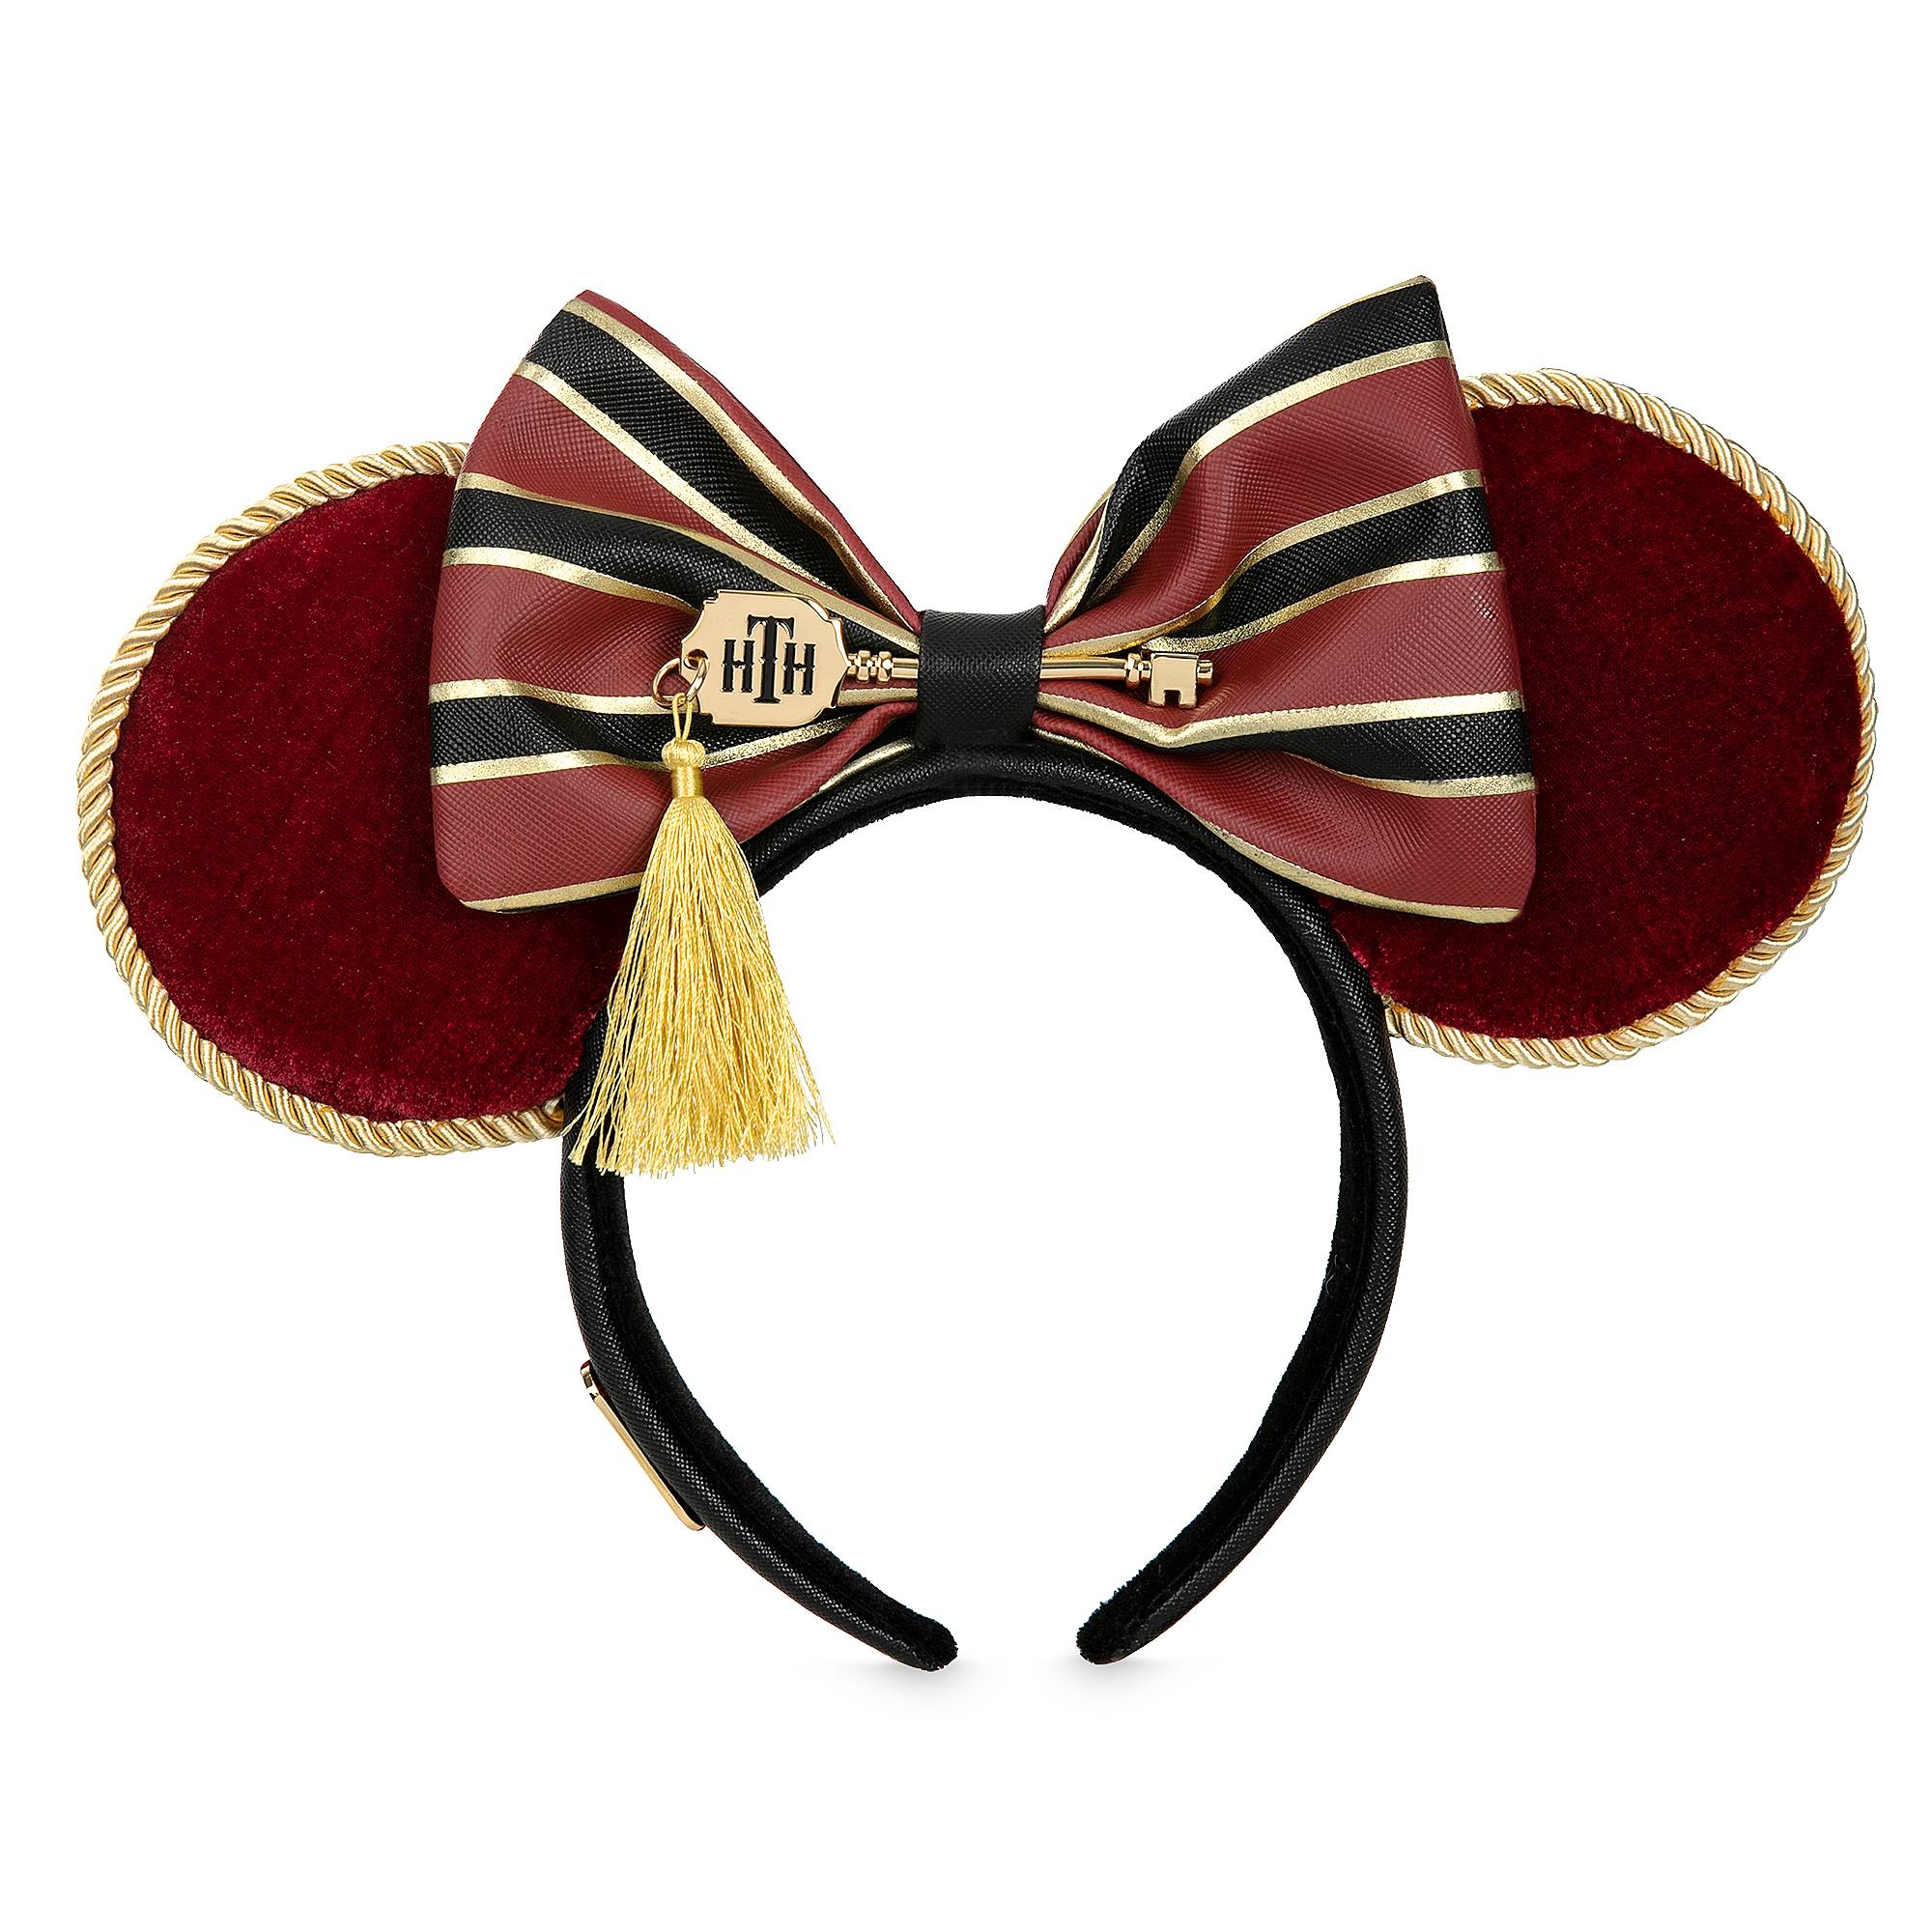 Hollywood Tower of Terror Minnie Mouse Ear Headband by Loungefly image